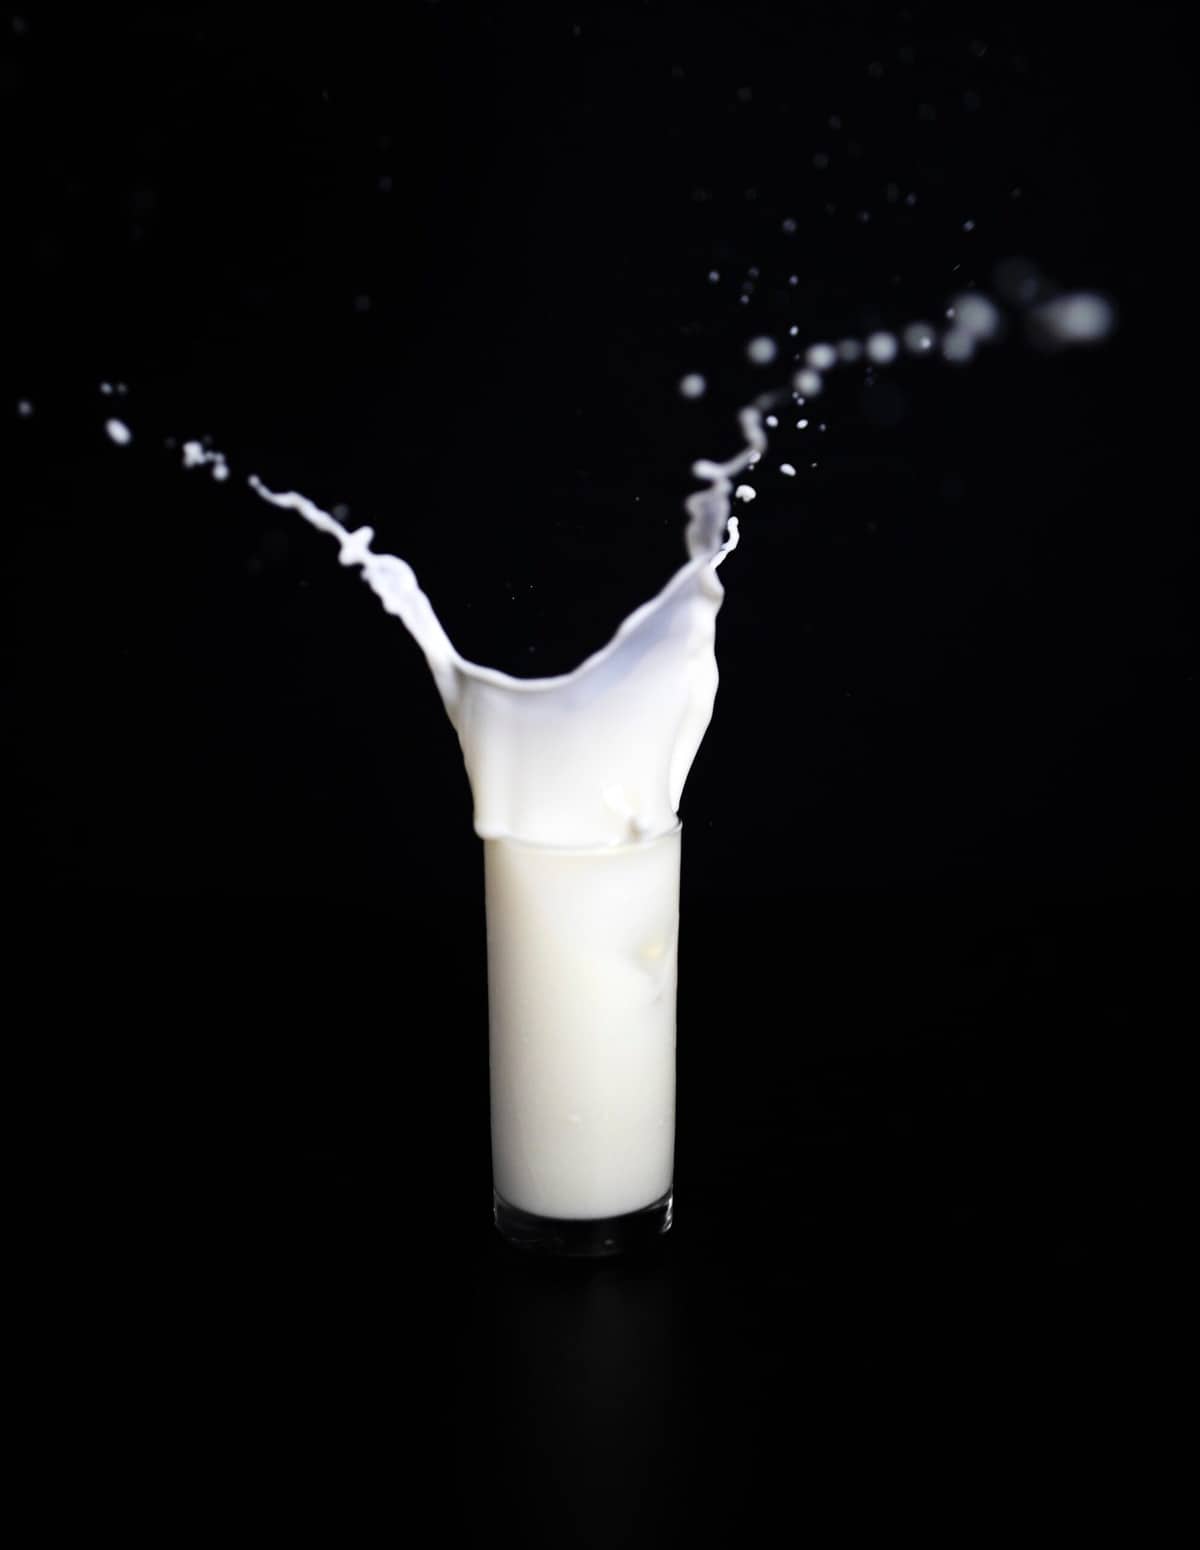 A glass of milk spilling against a black background. 